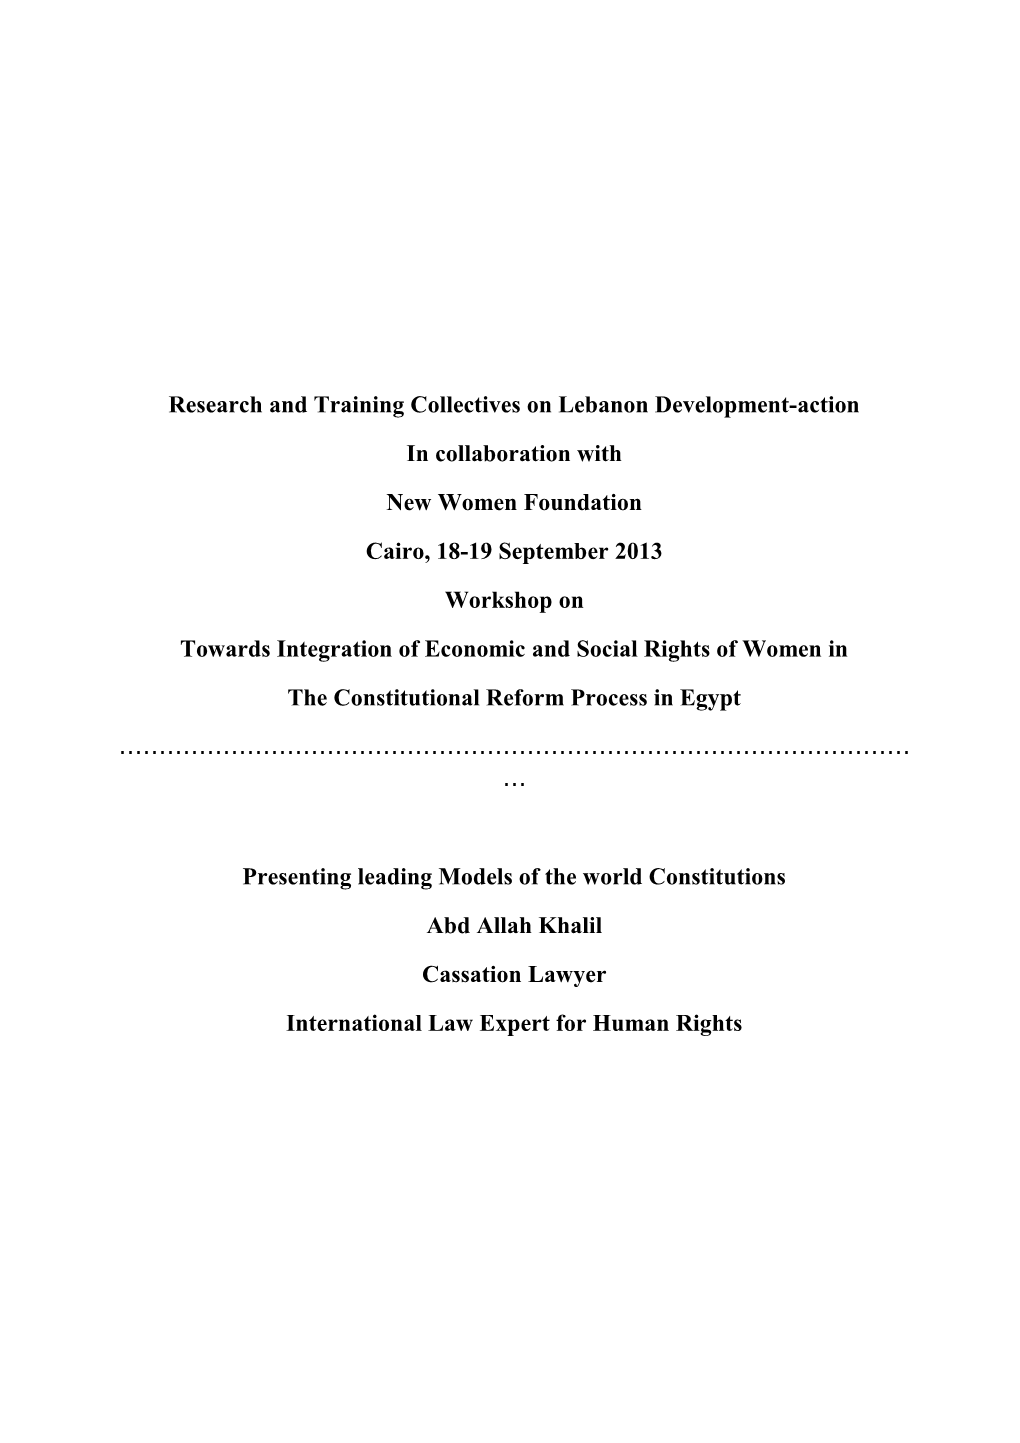 Research and Training Collectives on Lebanon Development-Action